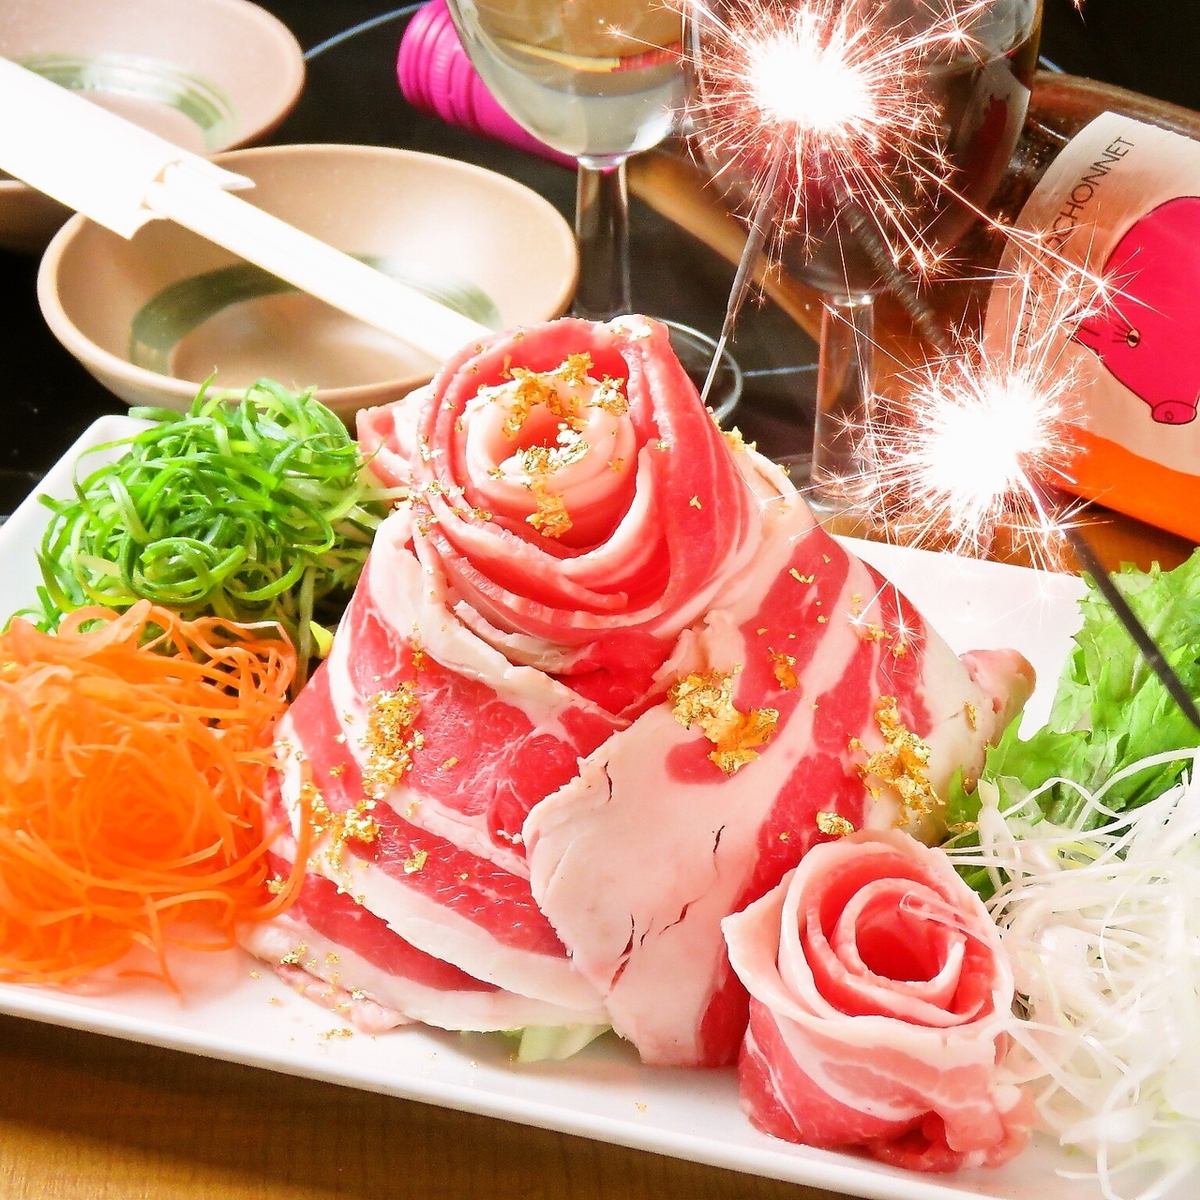 Meat bouquet service ♪ ☆ For birthday surprises and gifts ☆